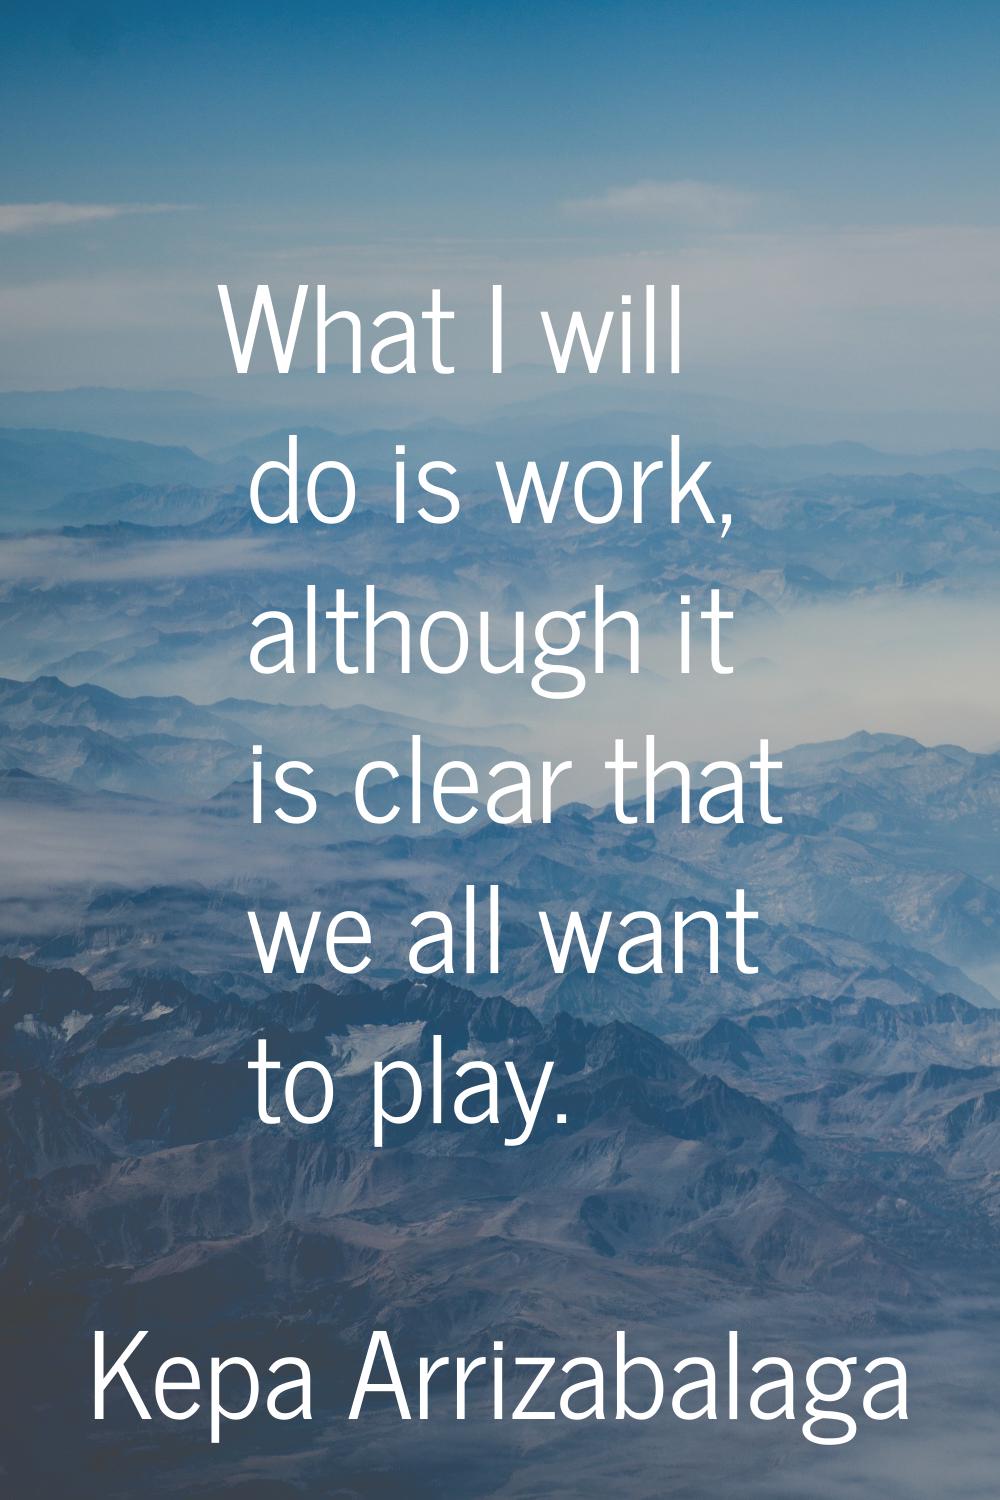 What I will do is work, although it is clear that we all want to play.